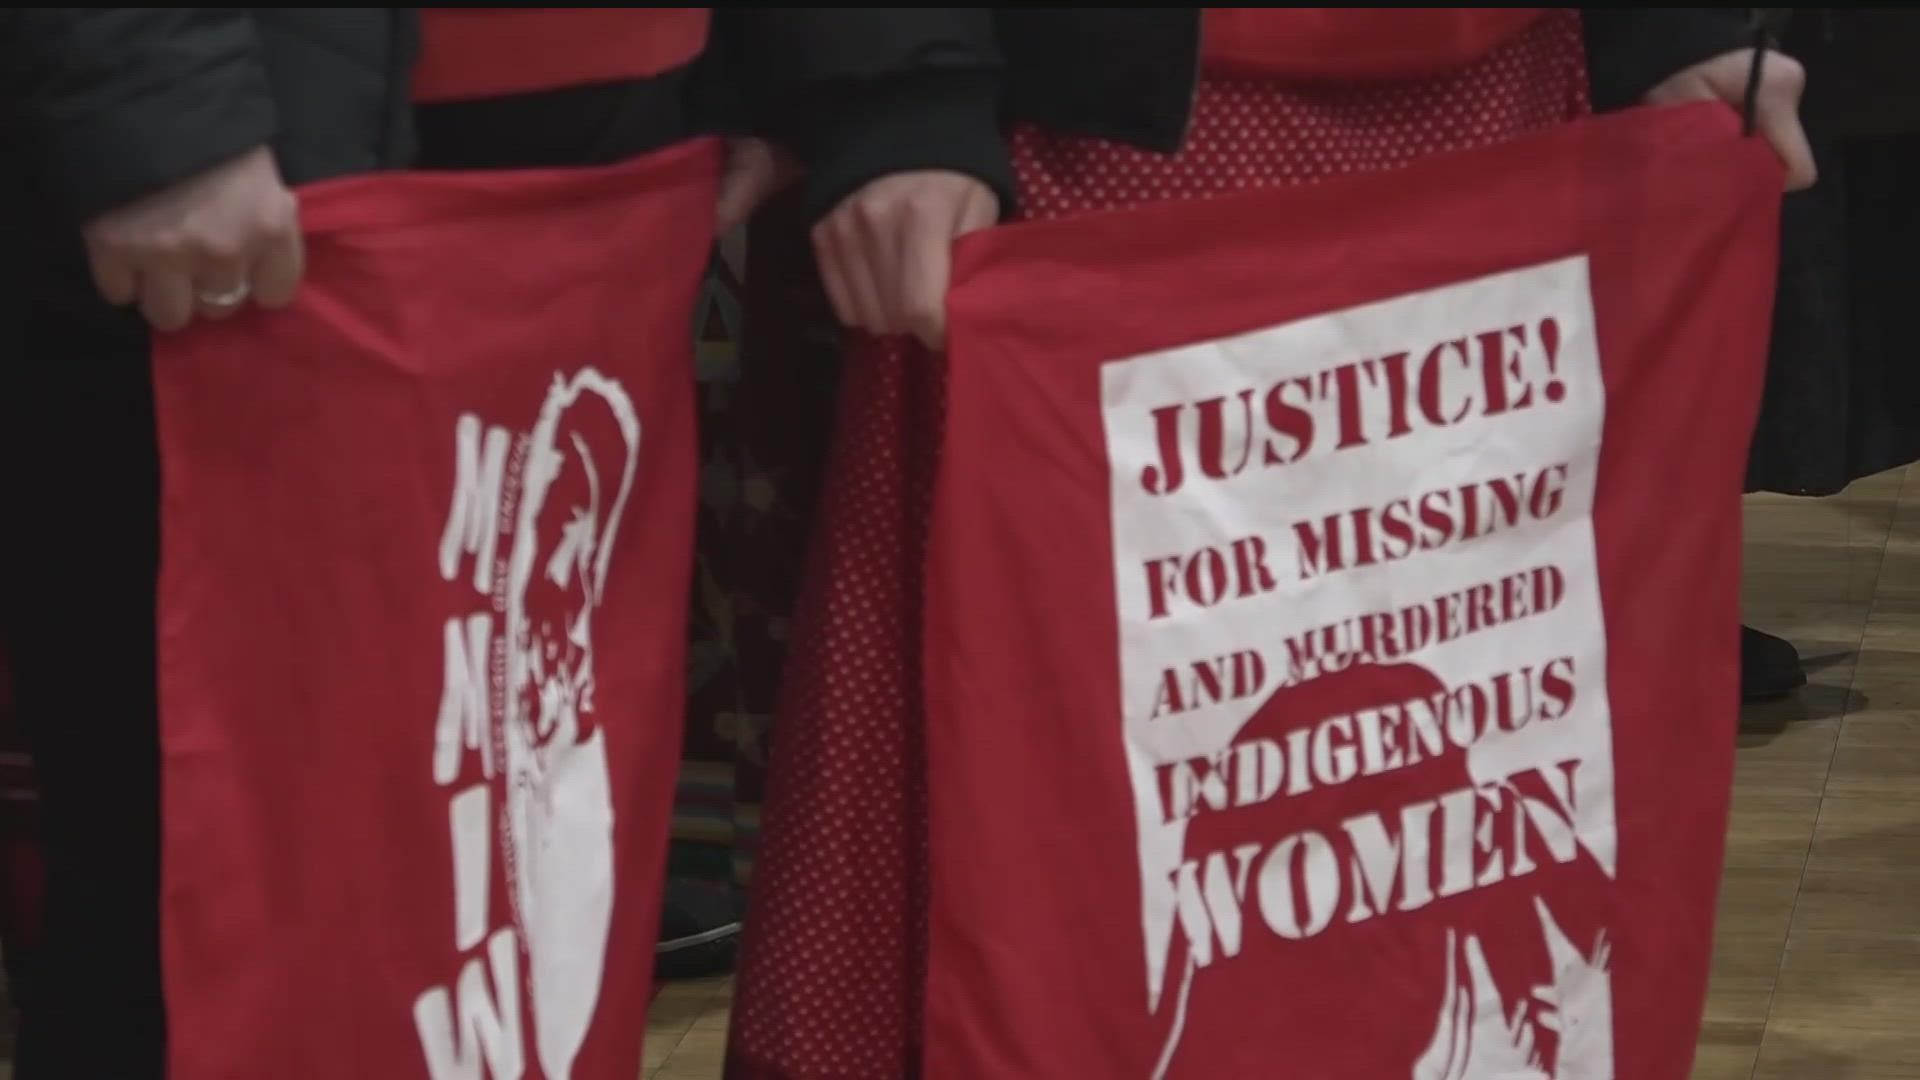 The event was put on by several organizations, including the Minnesota Indian Women's Sexual Assault Coalition and the Little Earth Residents Association.